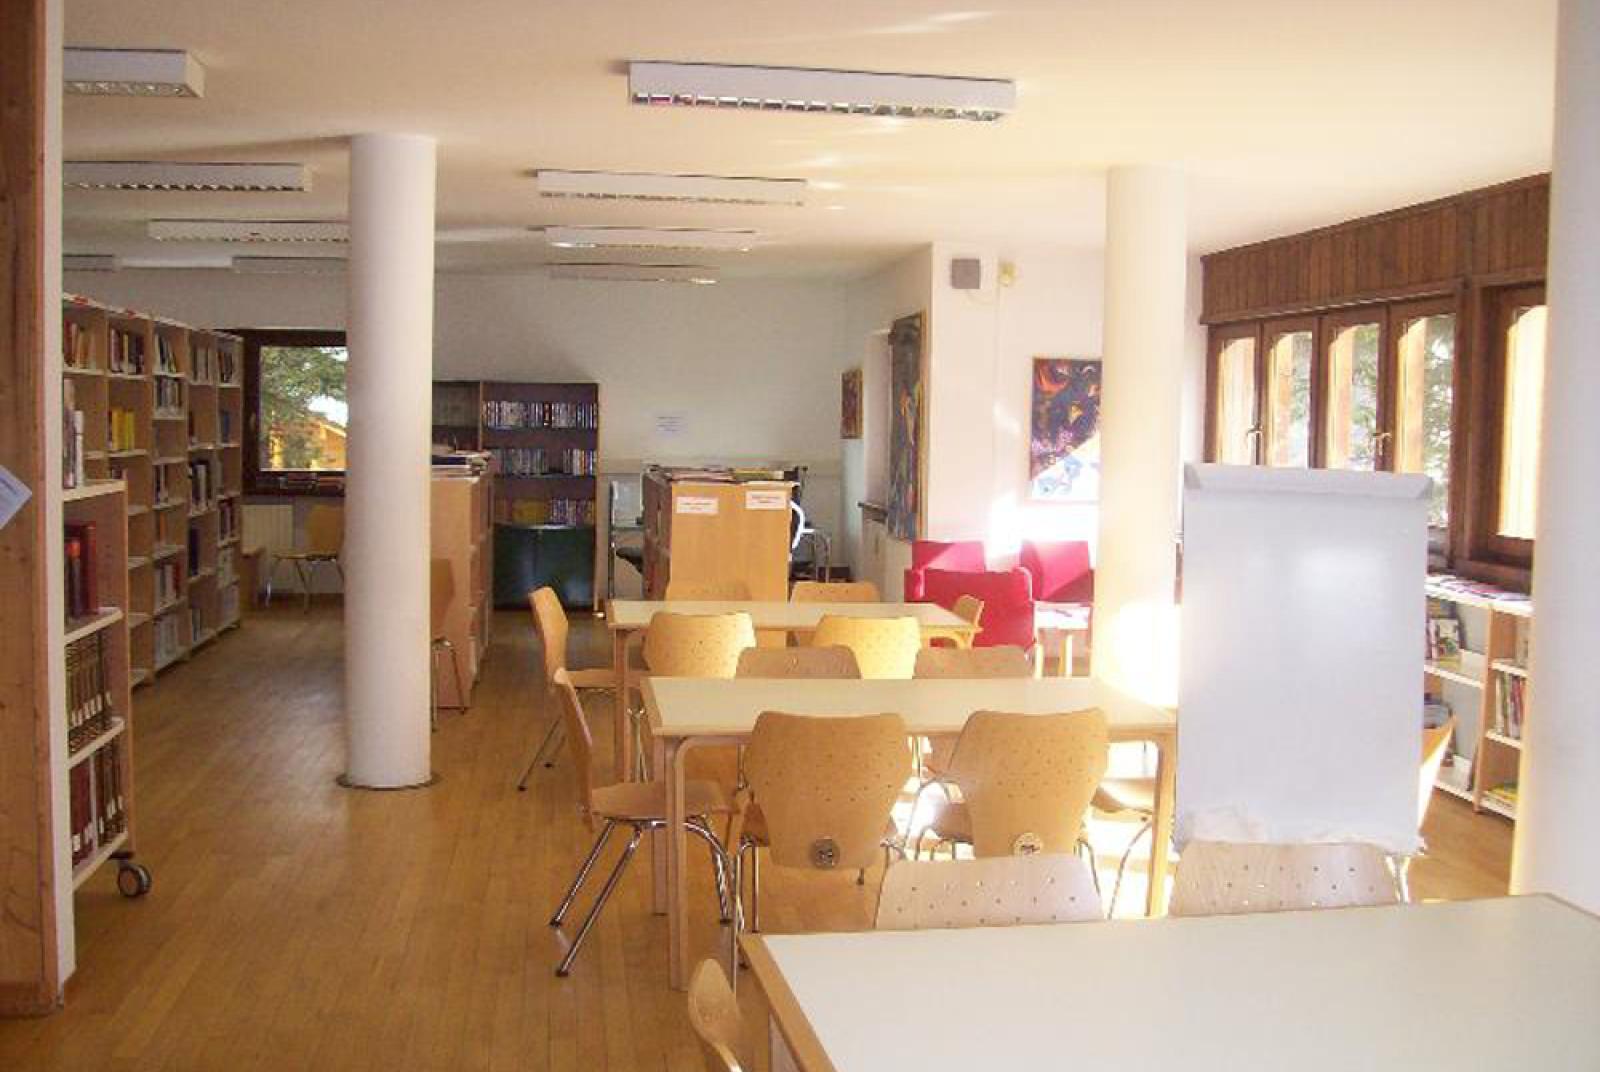 INTER-COMMUNE AND WALSER SPECIALIST LIBRARY